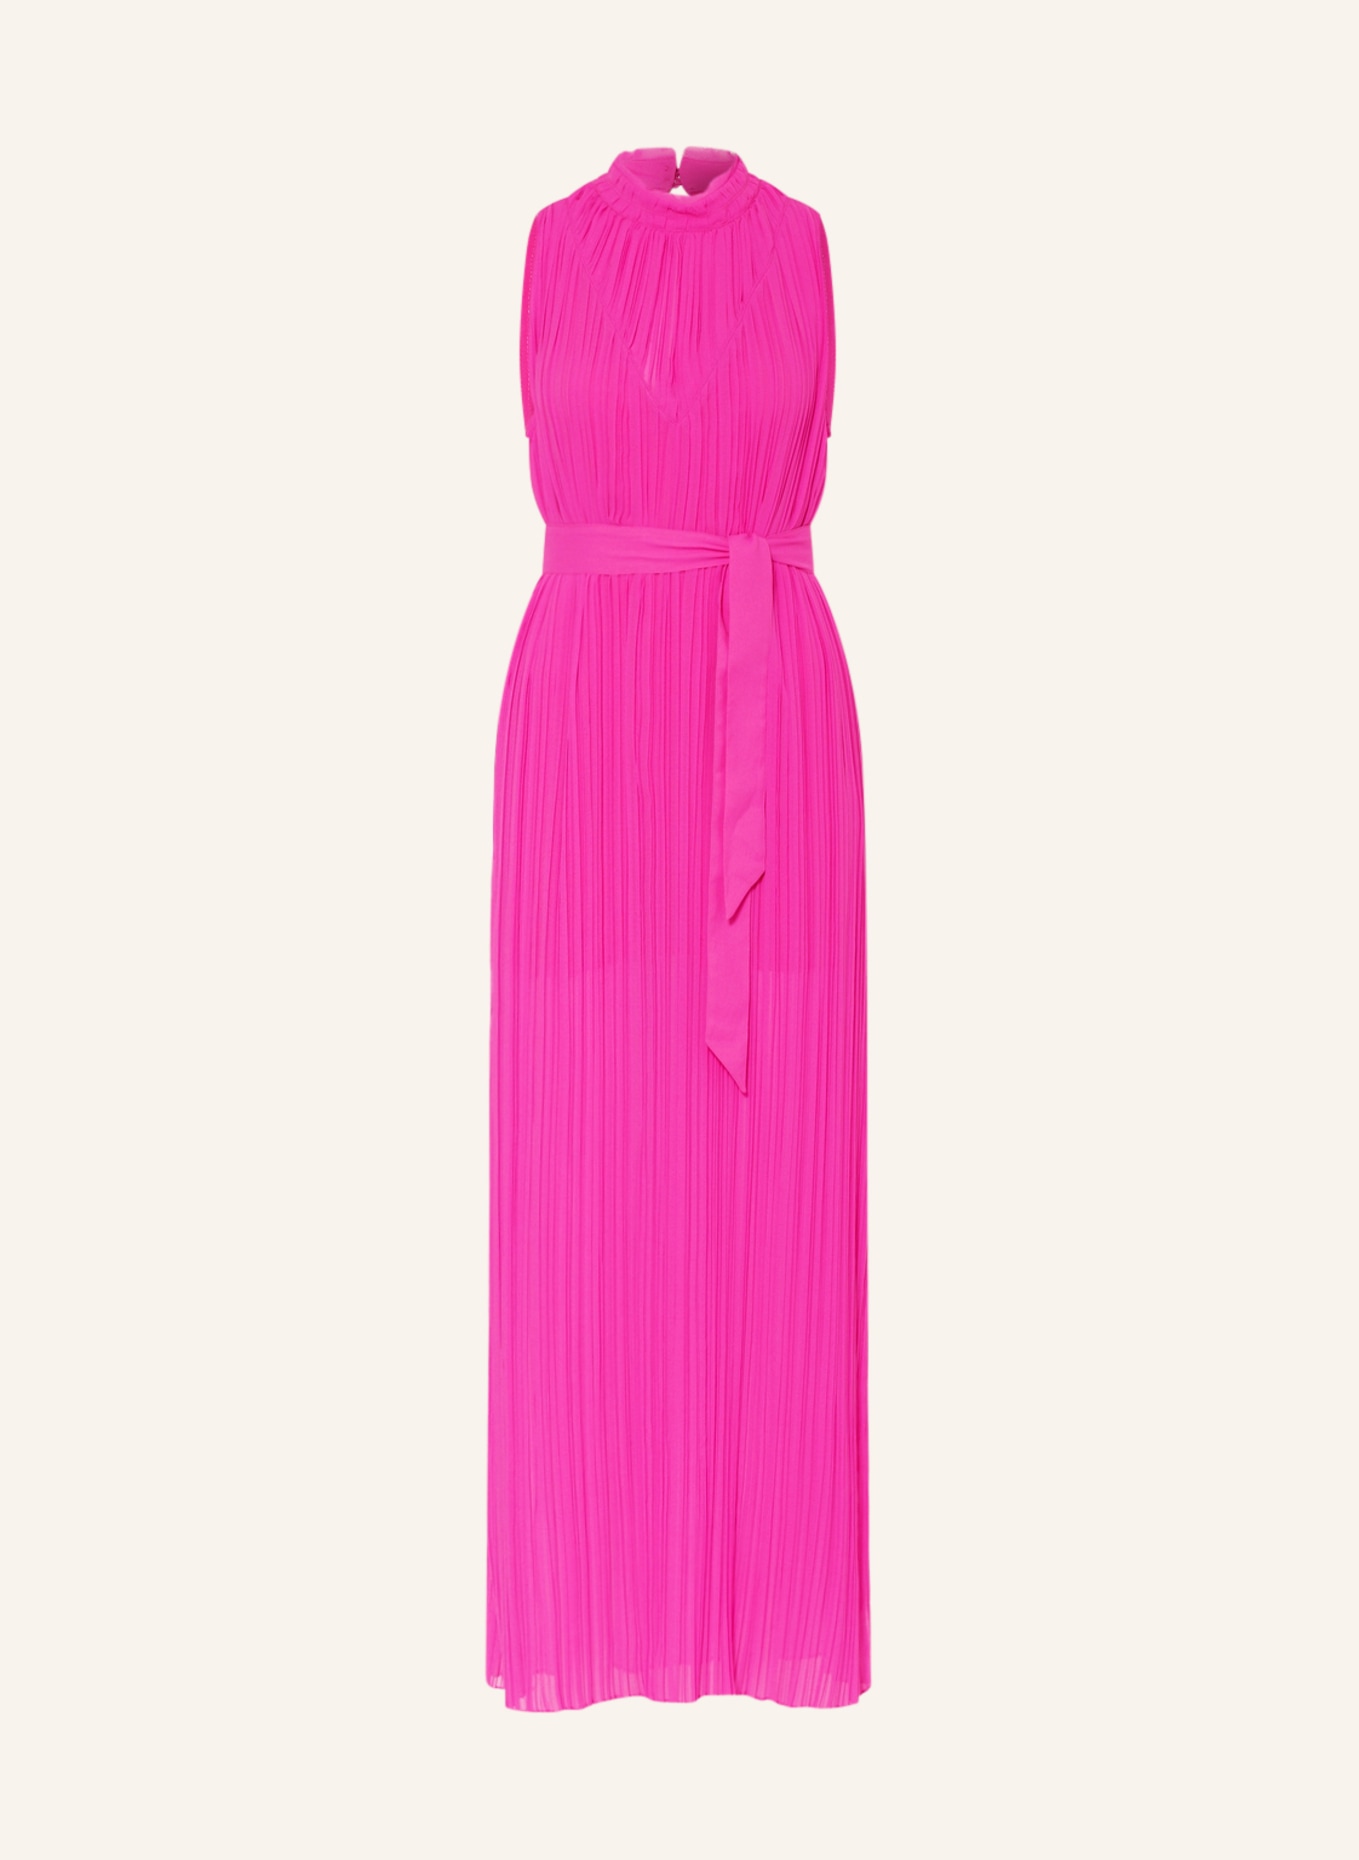 DANTE6 Pleated dress TRIXIE, Color: PINK (Image 1)